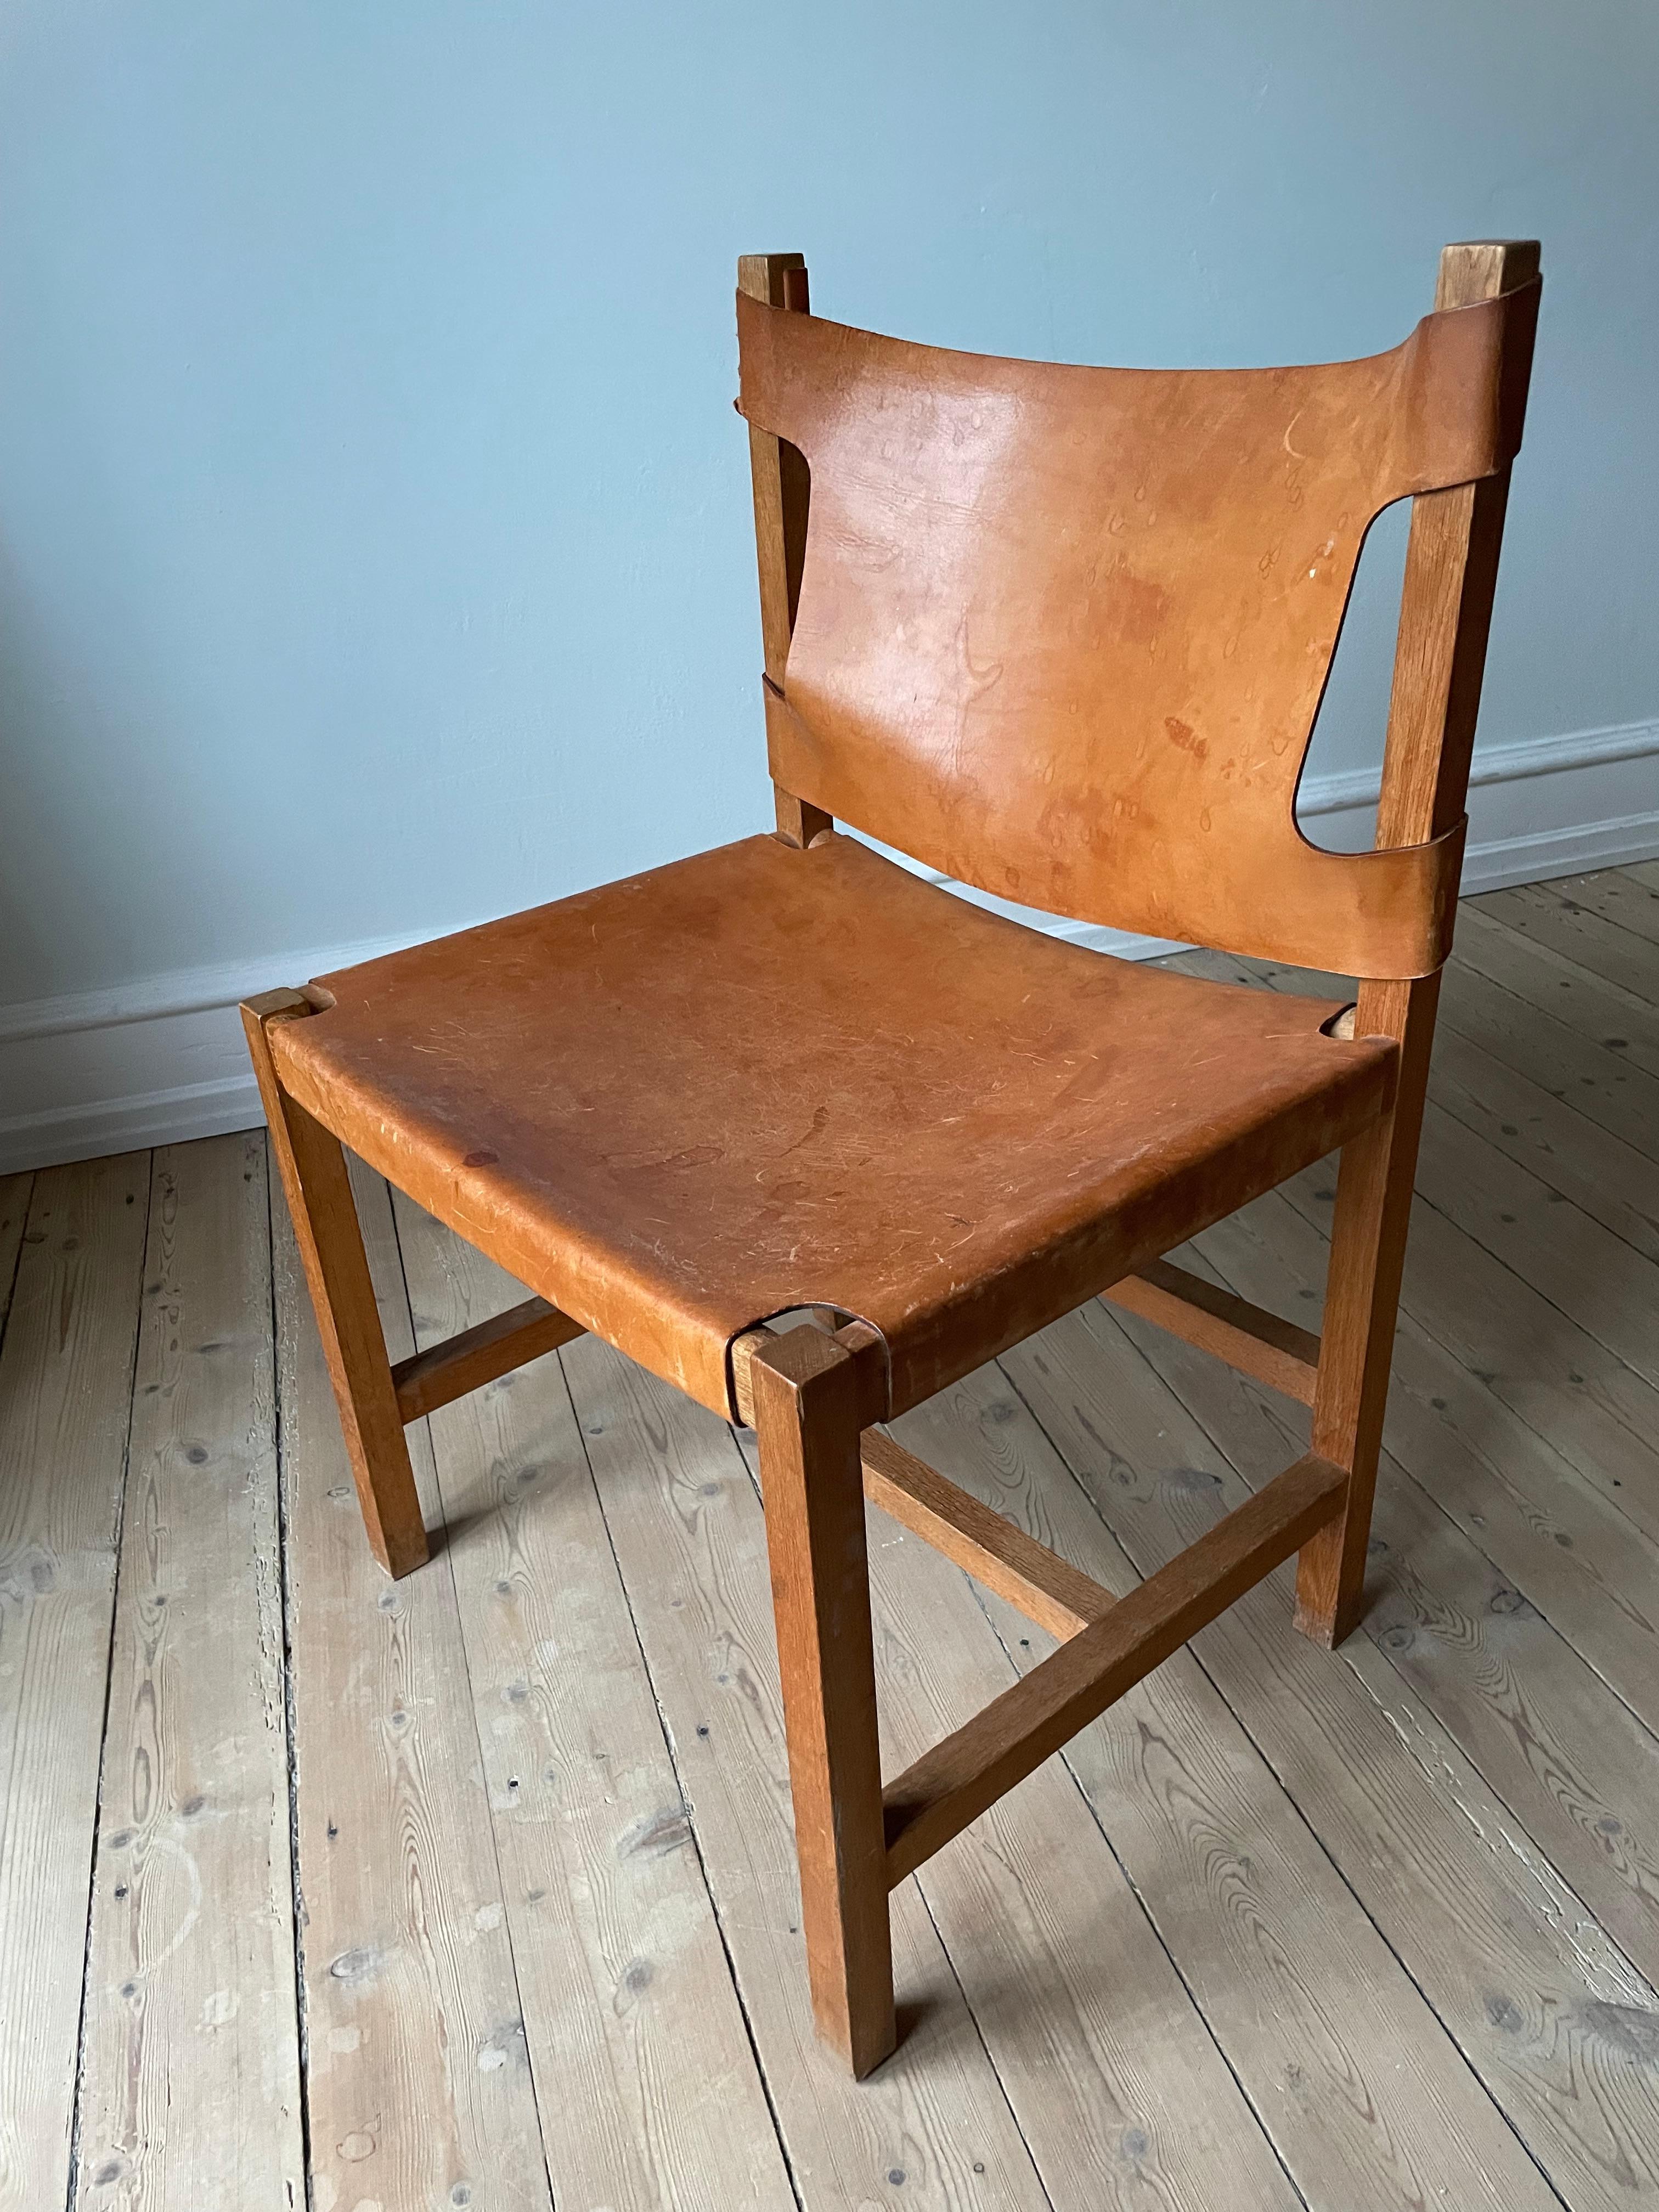 Danish Modern Wooden Leather Seat Chair, 1960s For Sale 6